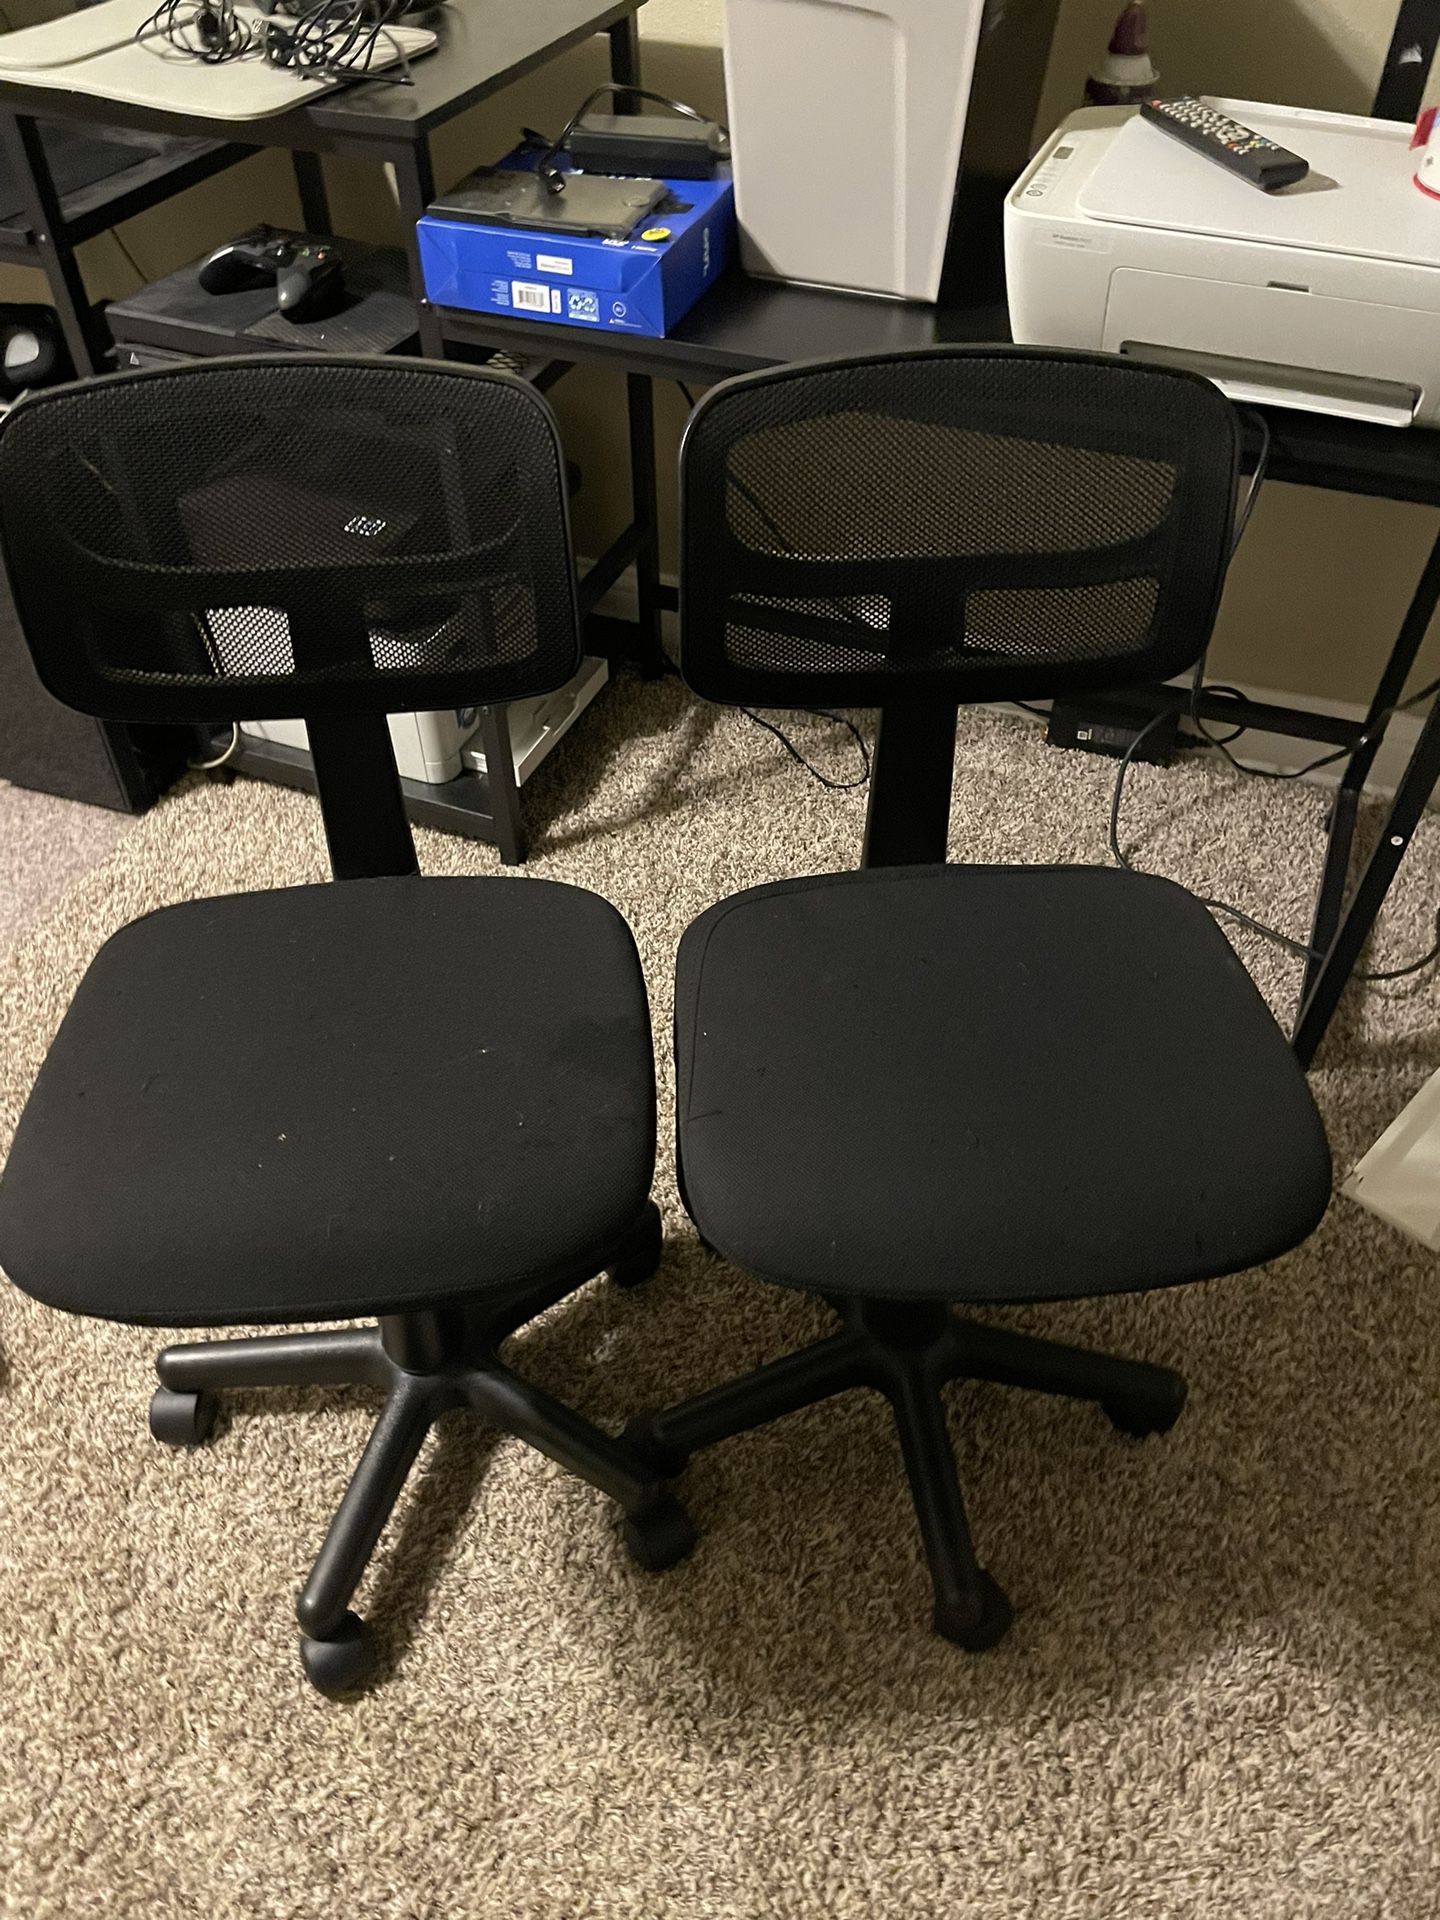 2 Person Desk with 2 Computer Chairs